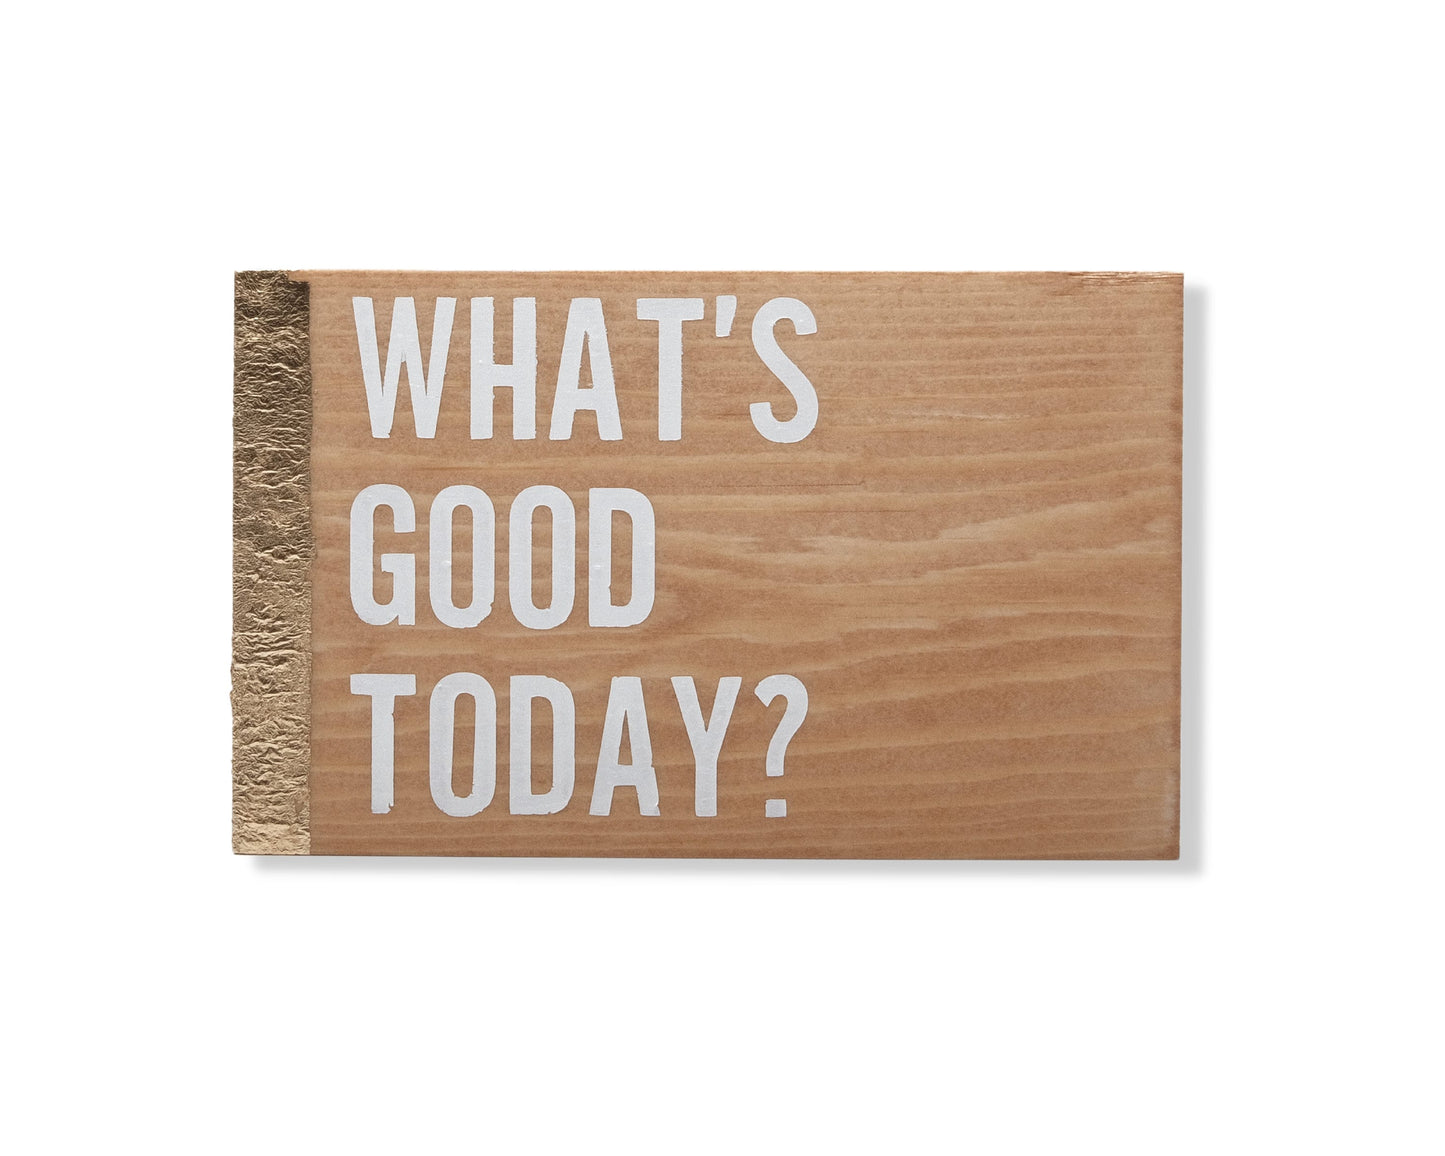 What's good today, custom wood block sign, inspirational quote, motivation, self care, gift for her, gift for him, home decor, wooden